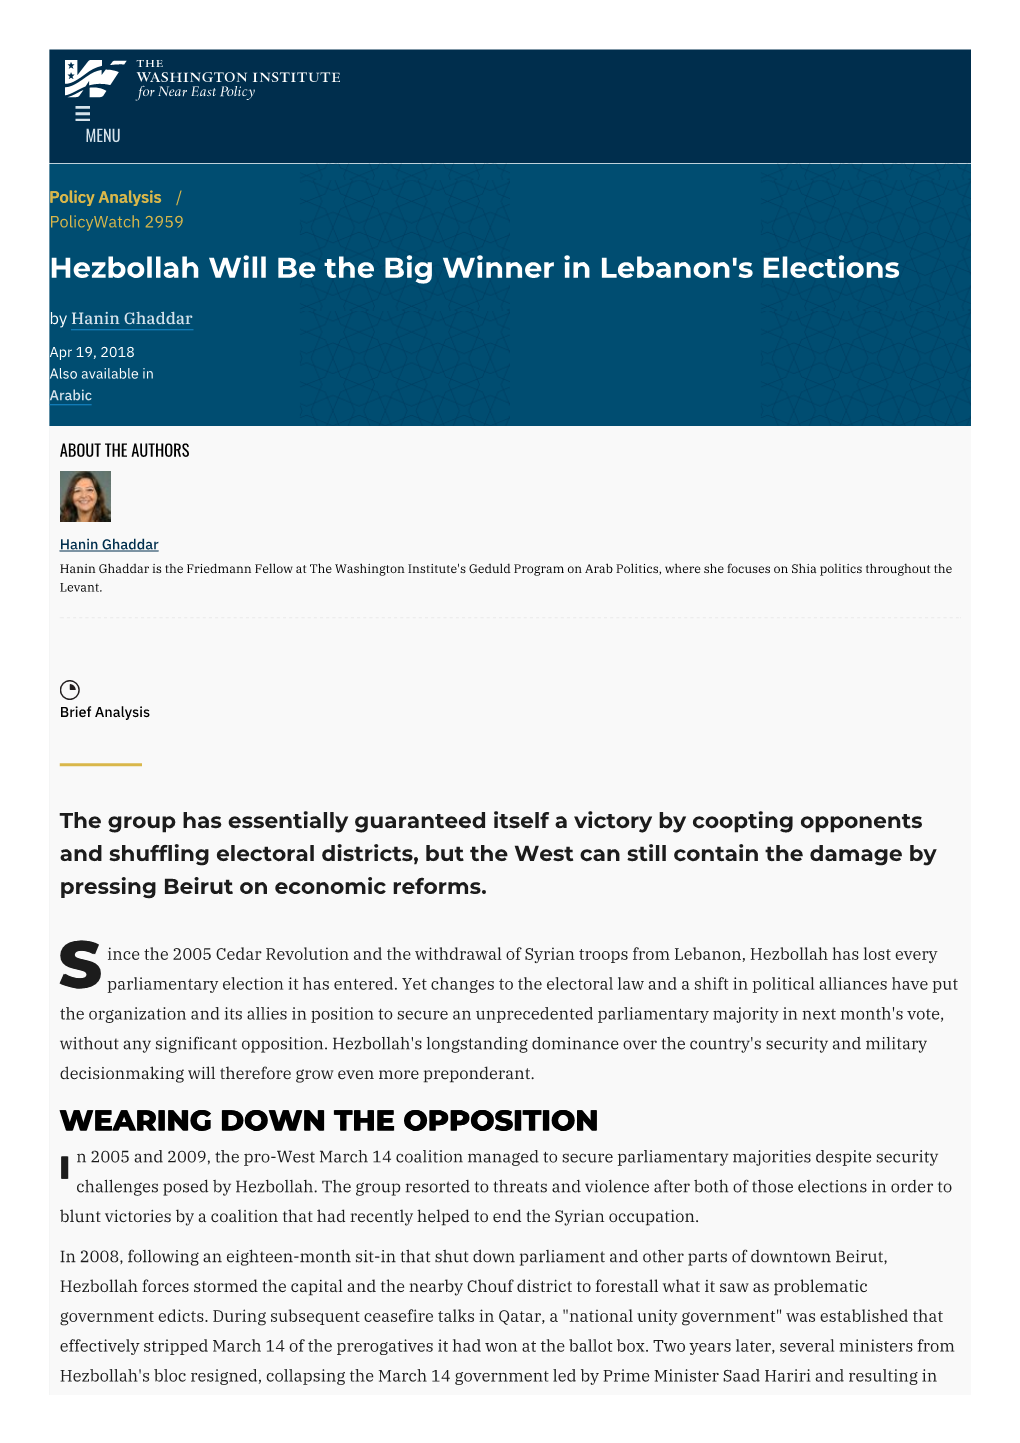 Hezbollah Will Be the Big Winner in Lebanon's Elections | the Washington Institute